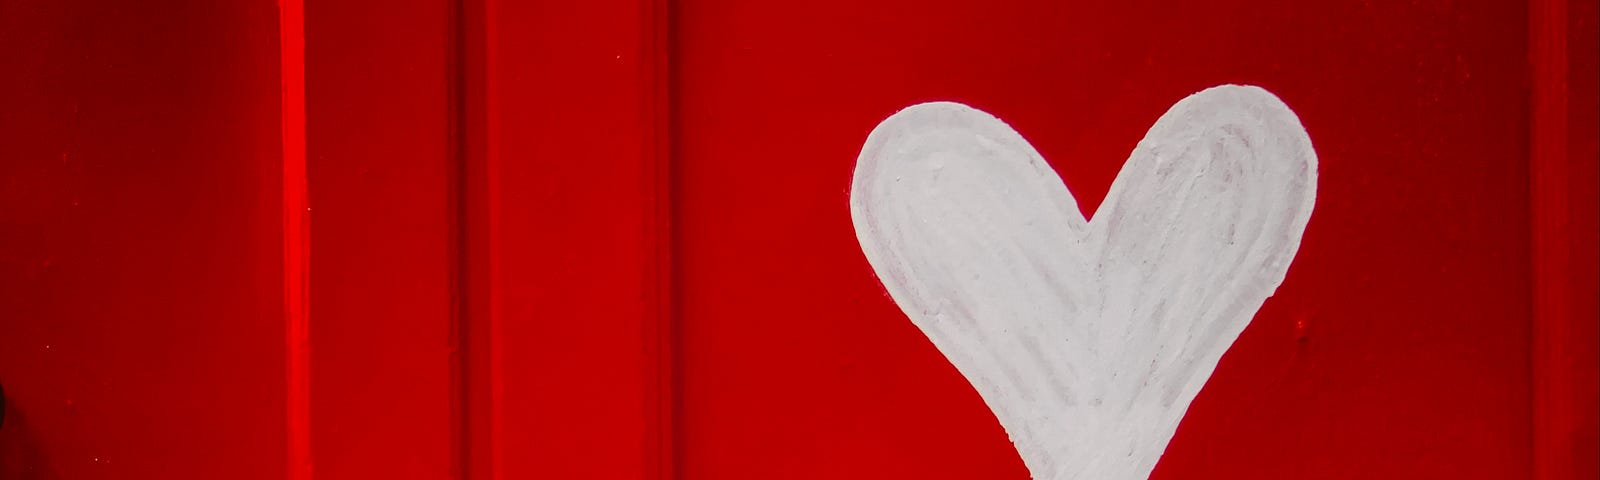 A bright red door with red, pink and white hearts painted on it.